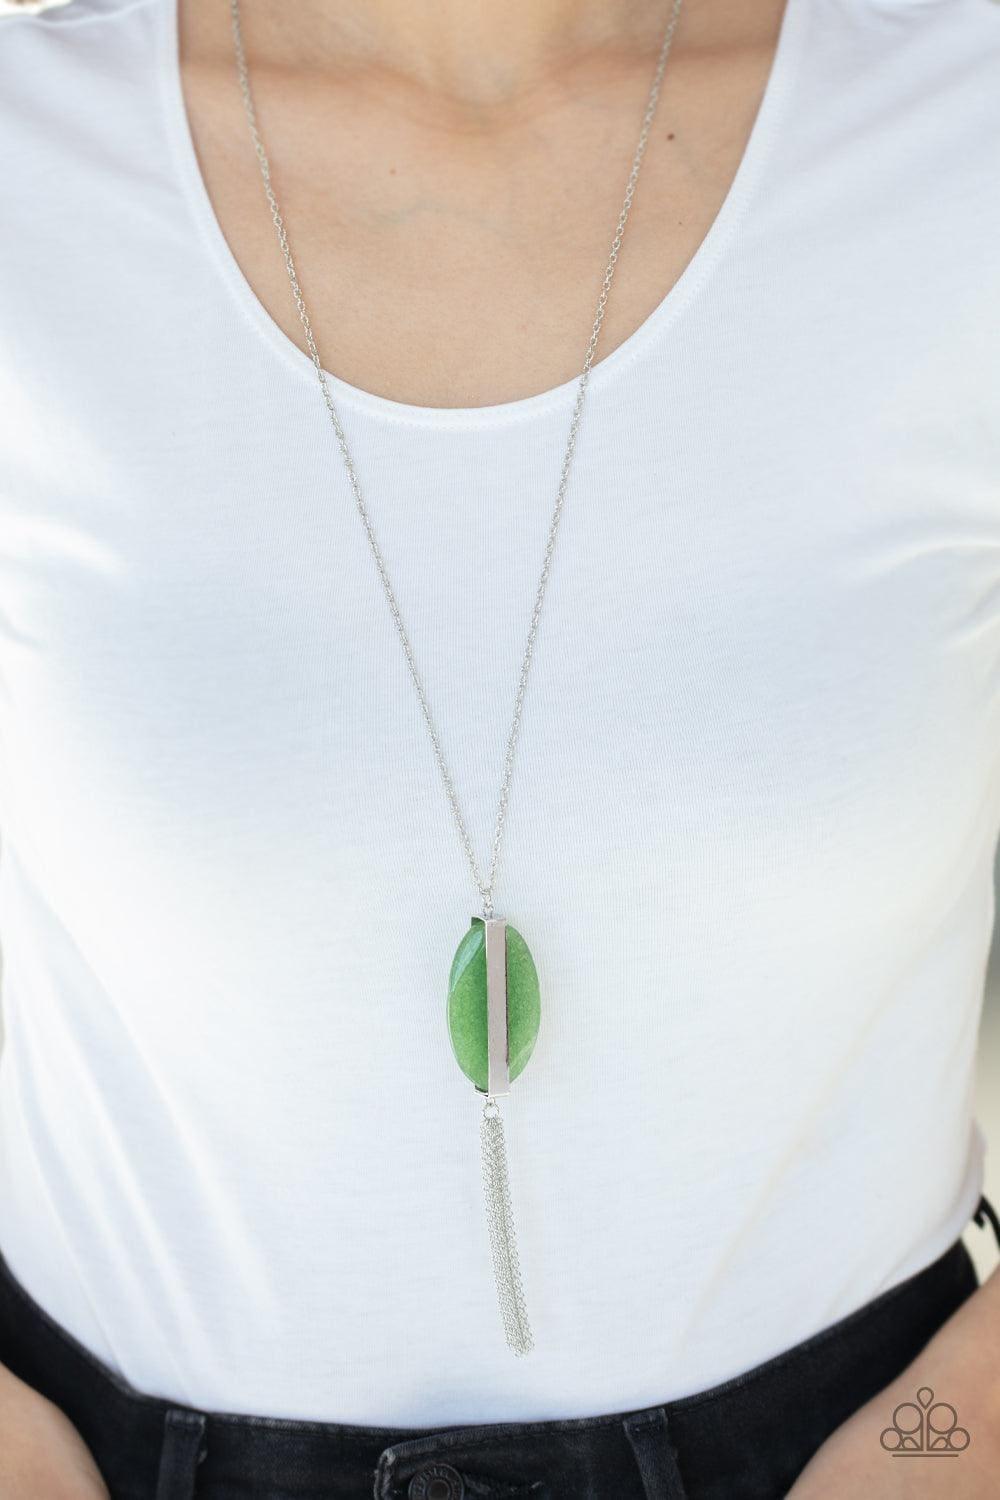 Paparazzi Accessories - Tranquility Trend - Green Necklace - Bling by JessieK